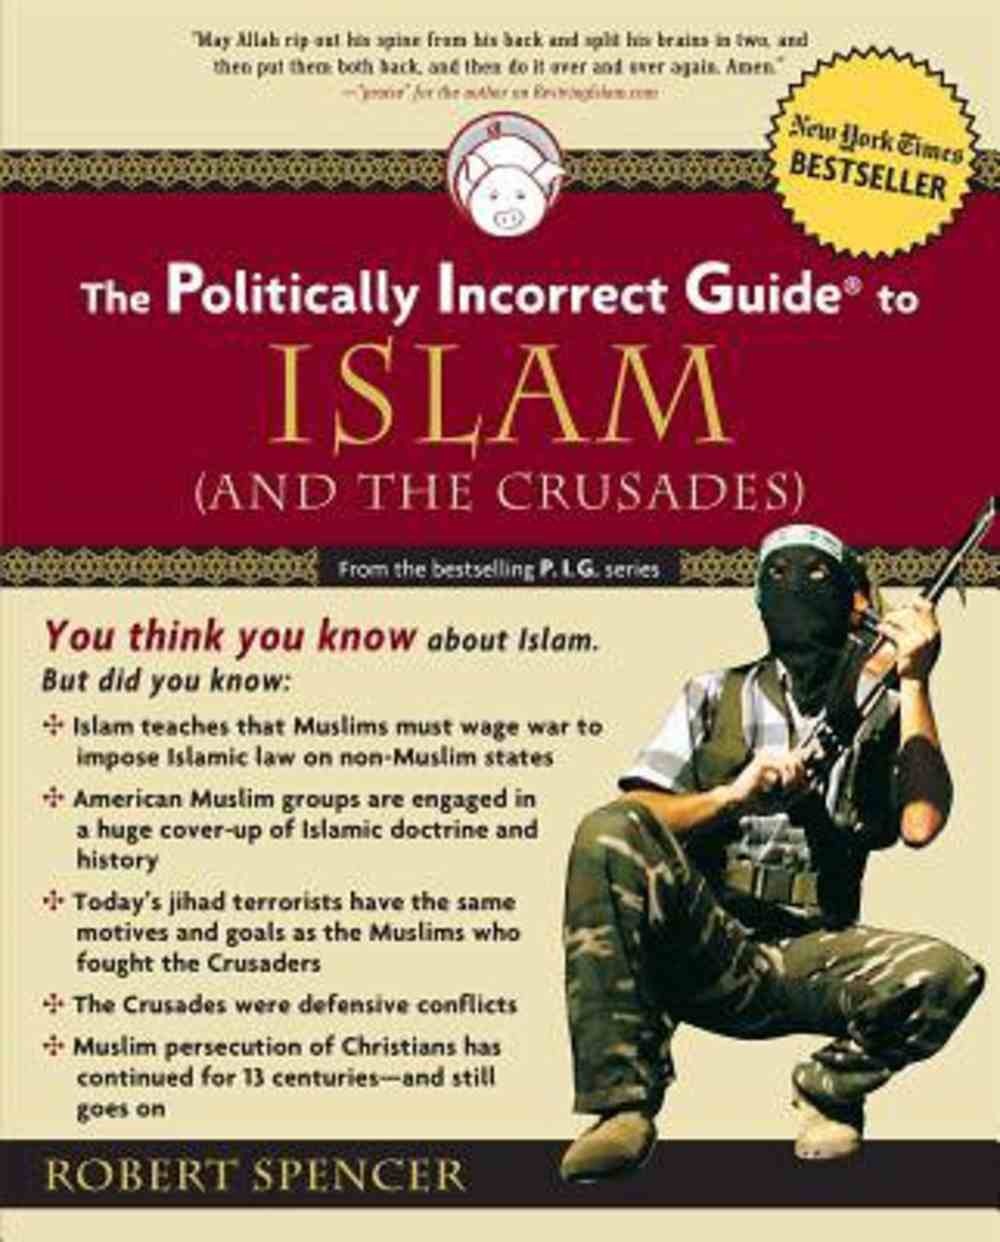 The Politically Incorrect Guide to Islam